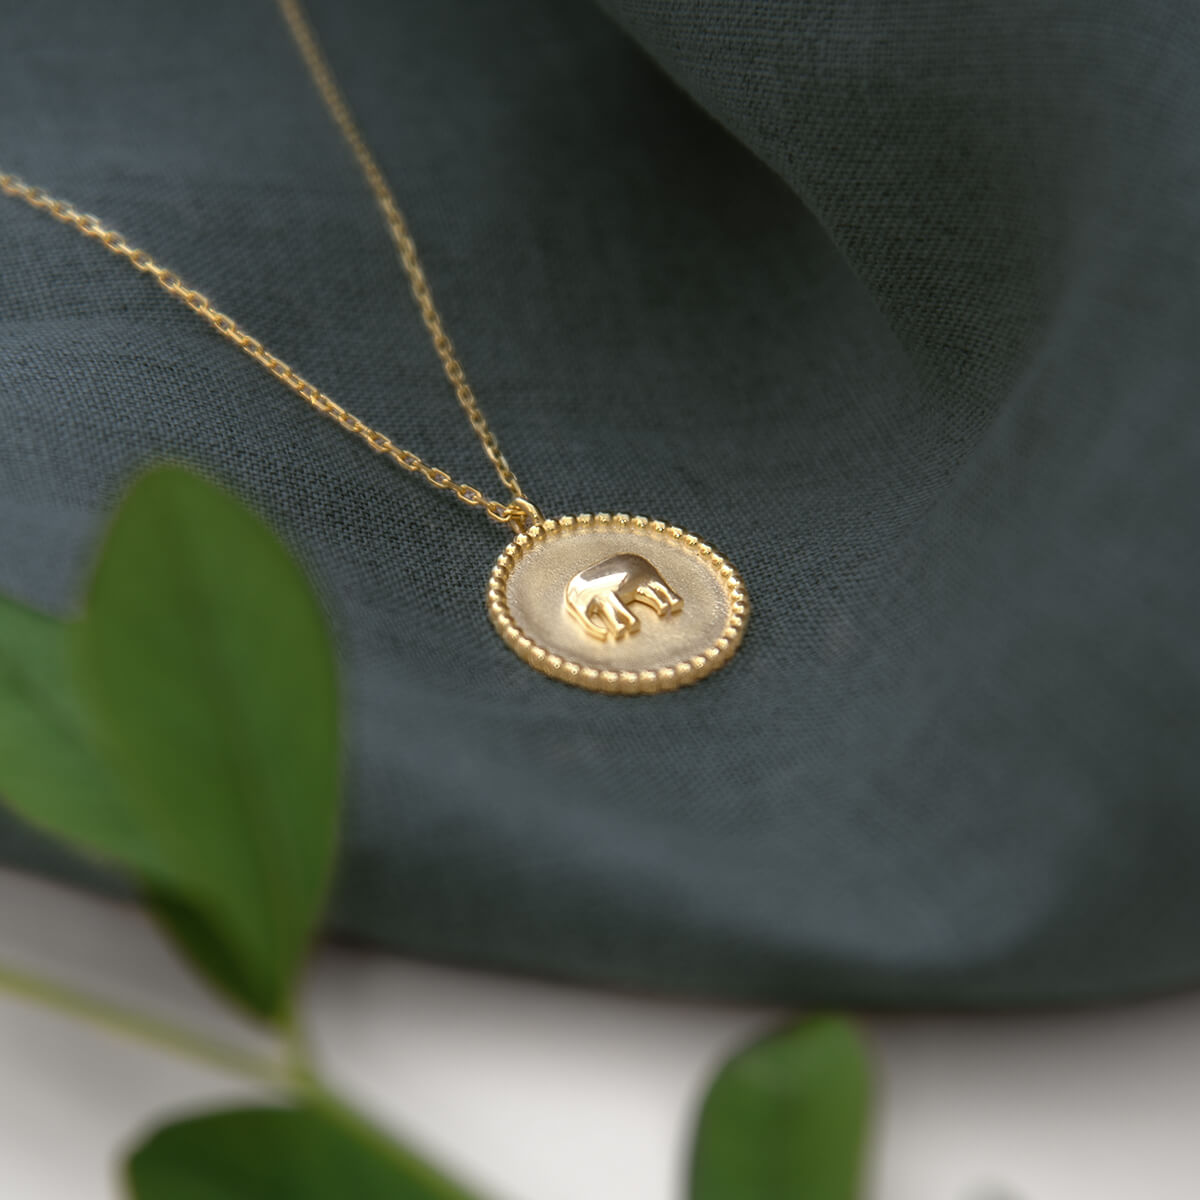 Elephant Gold Plated Pendant Necklace